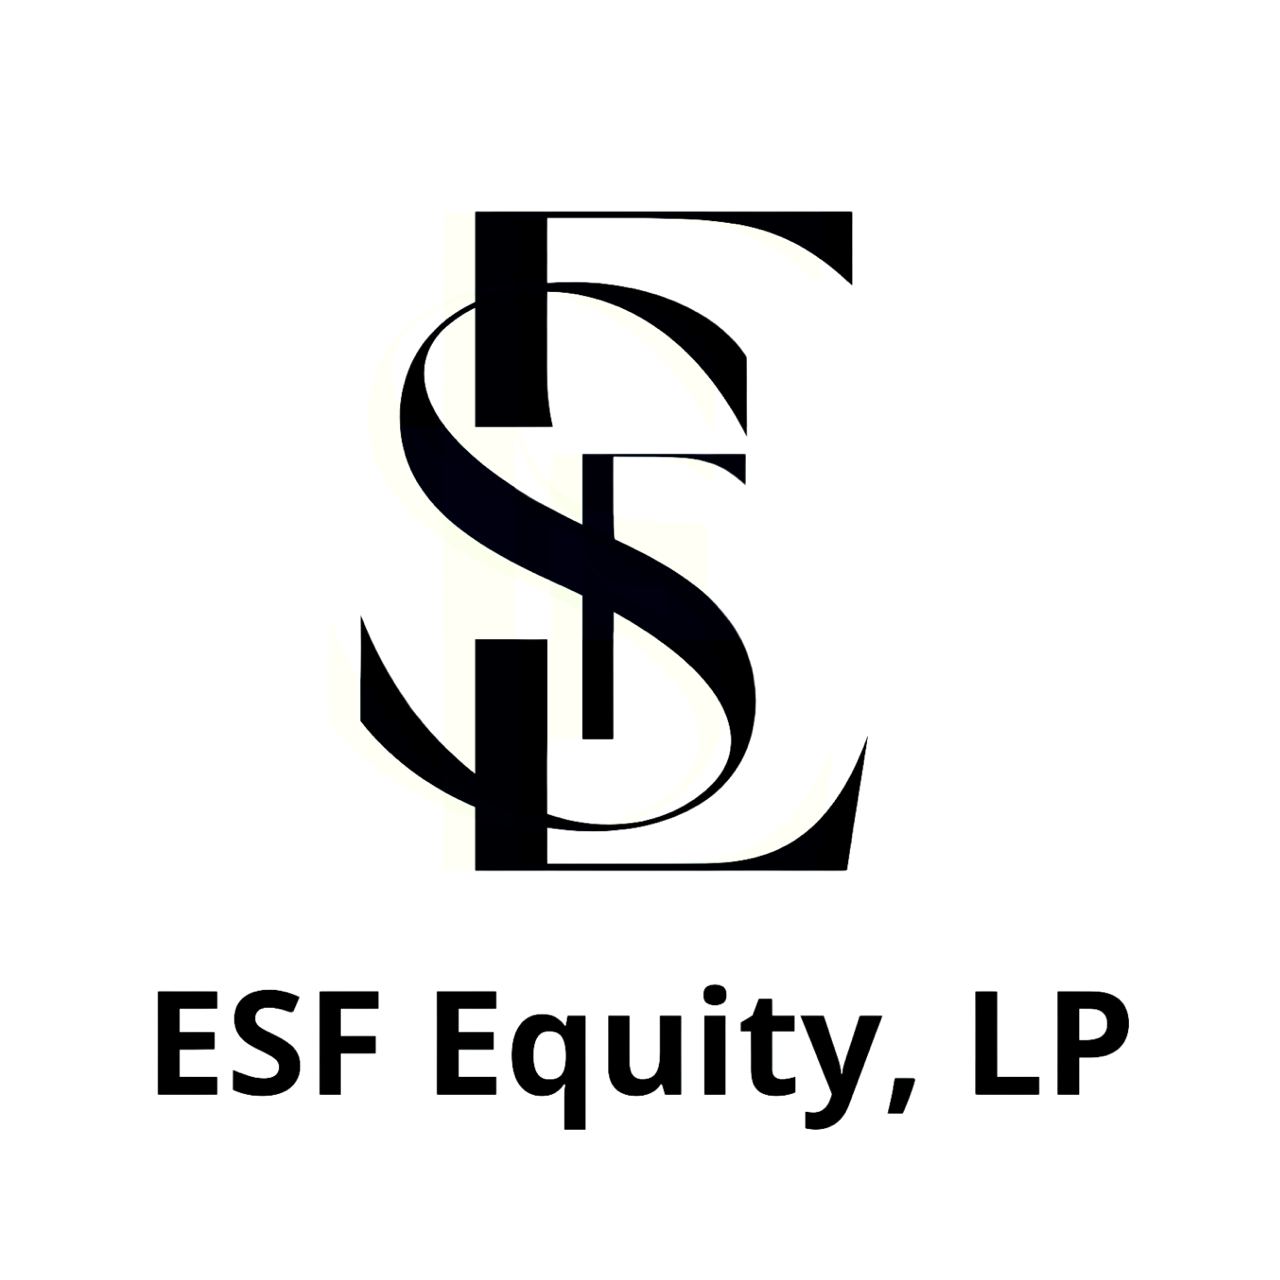 ESF Equity, LP Launches Investigation into Global Boiler Room Syndicate Scams Targeting Investors